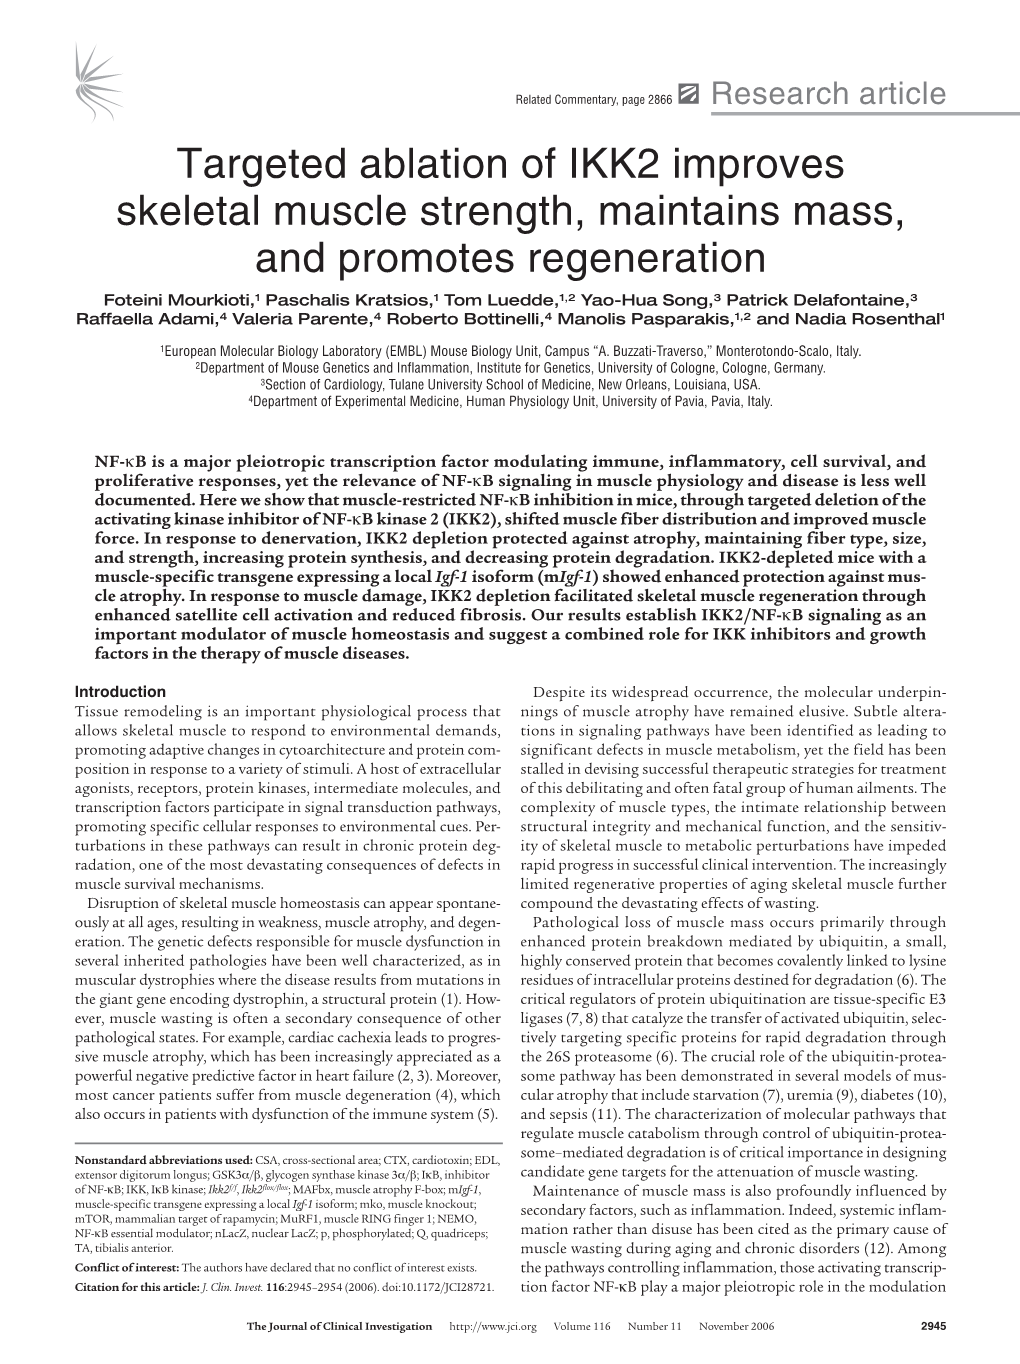 Targeted Ablation of IKK2 Improves Skeletal Muscle Strength, Maintains